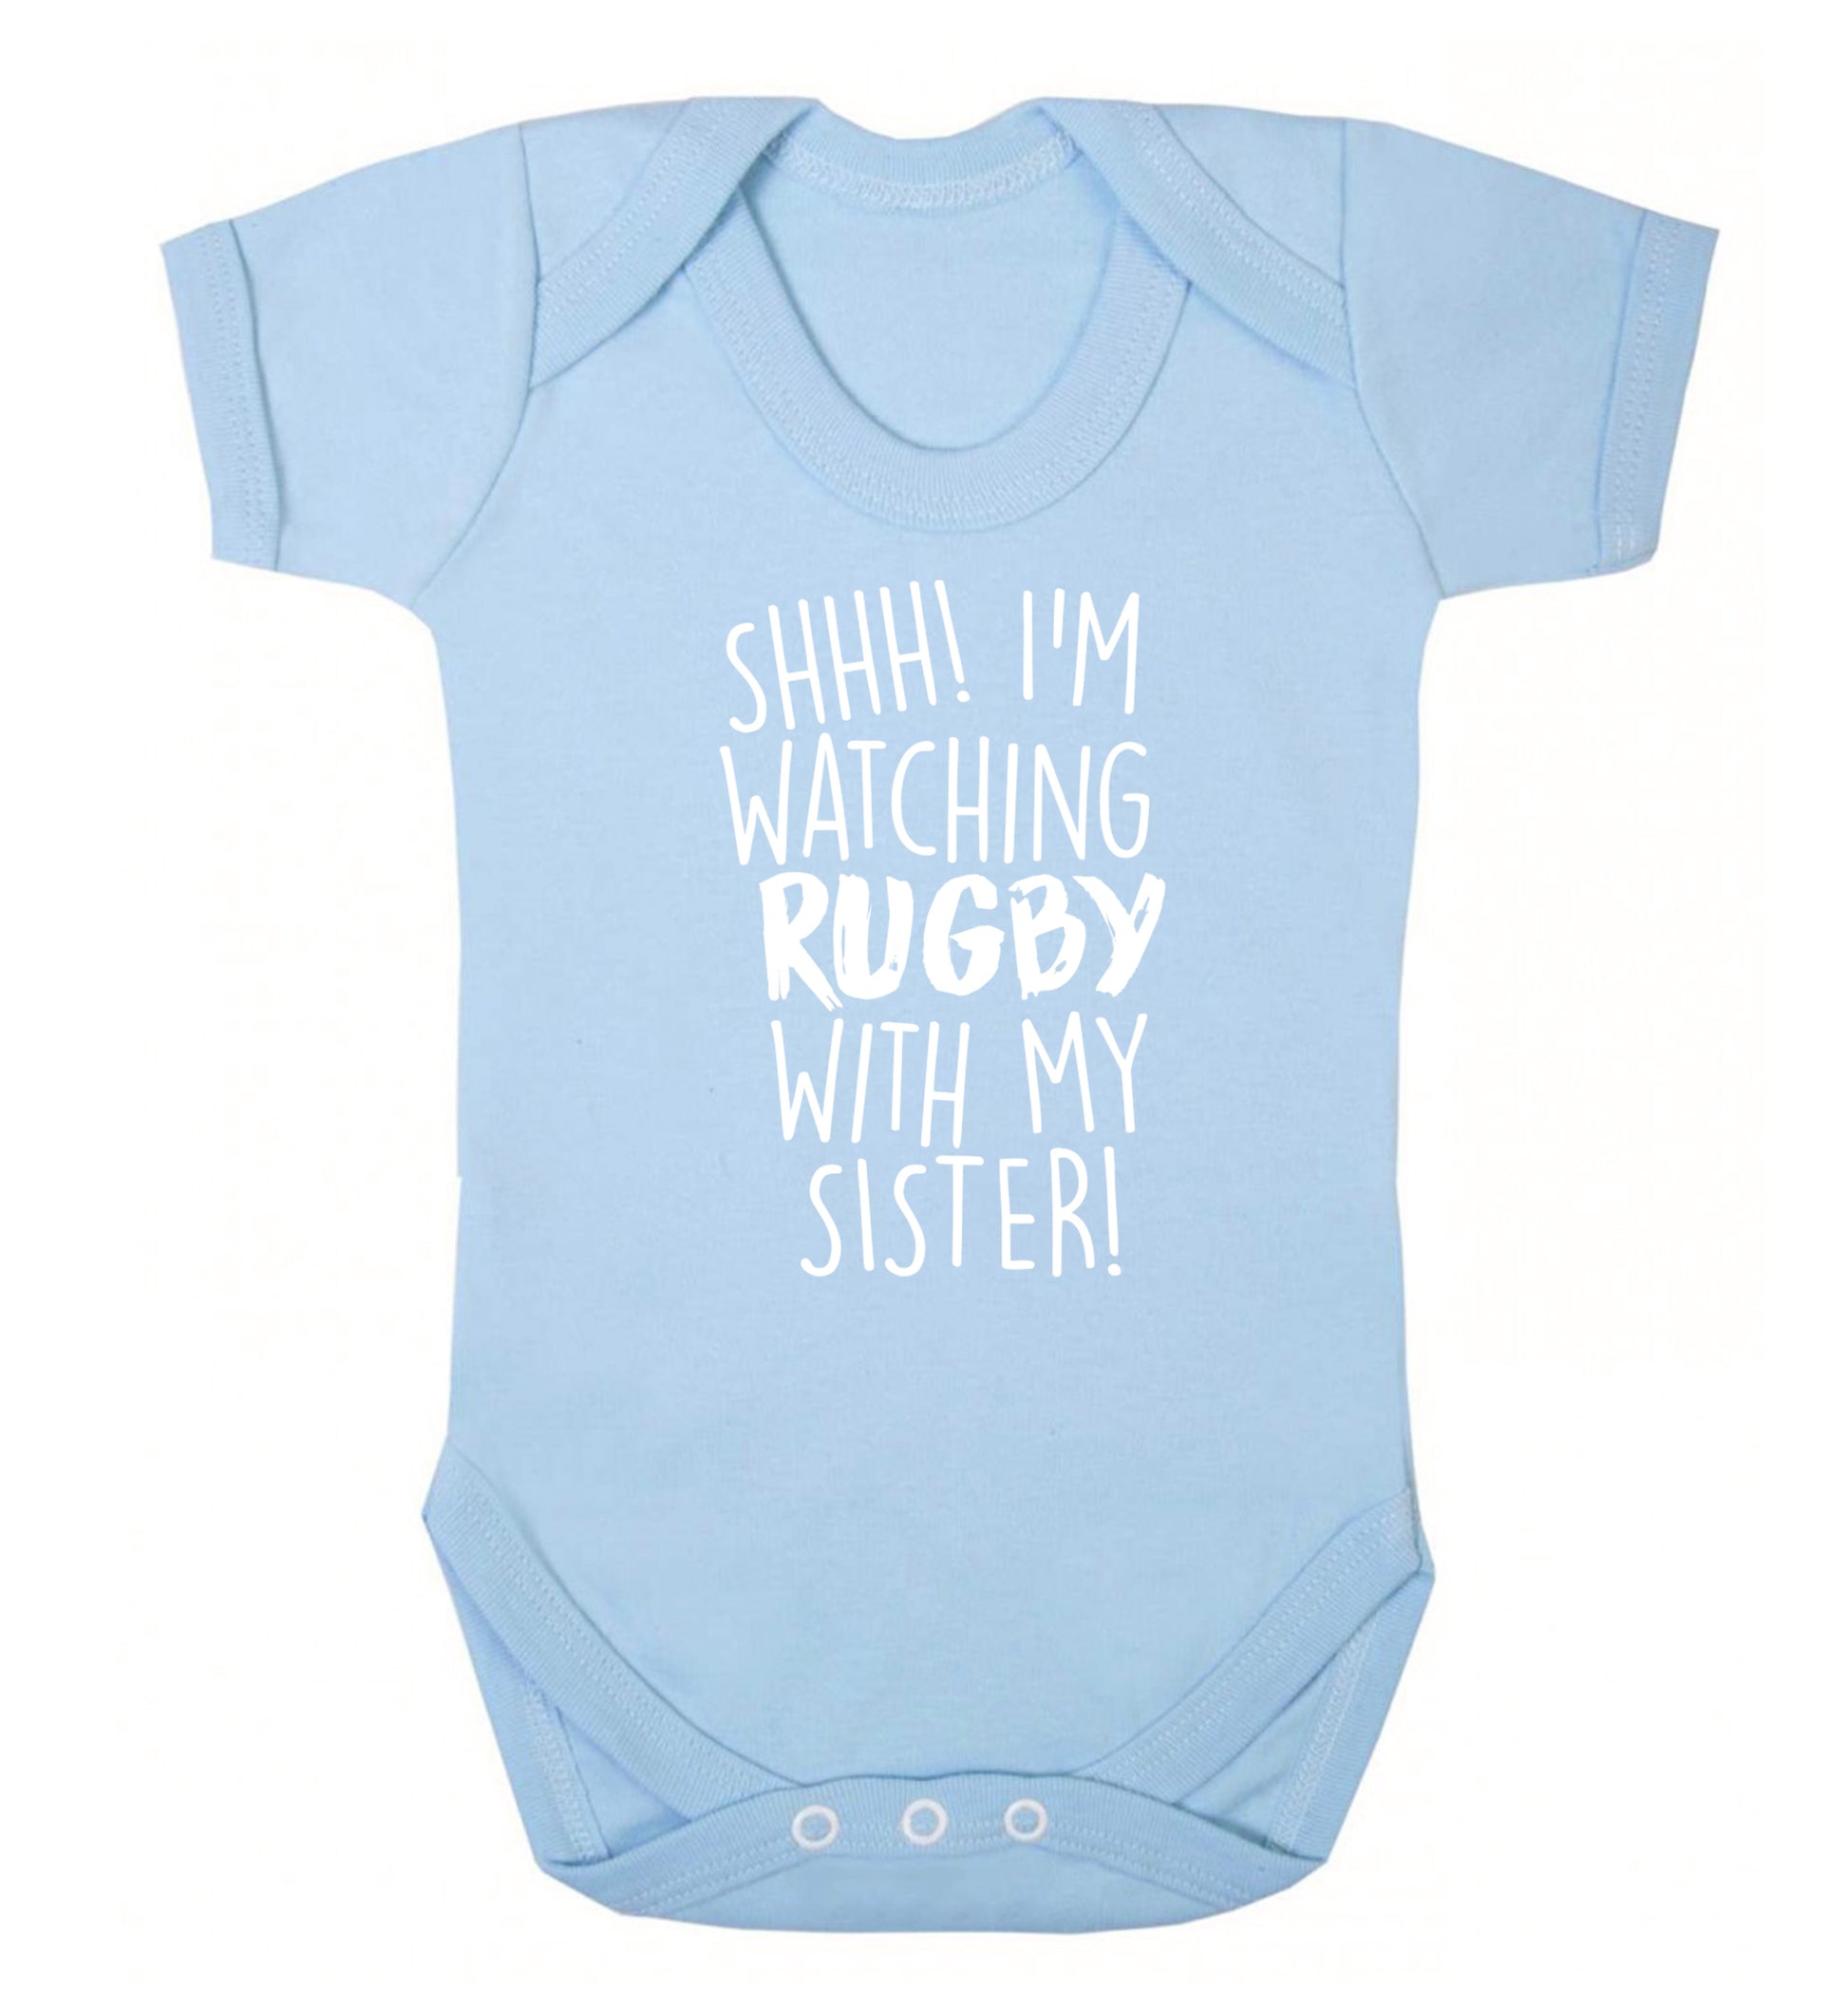 Shh... I'm watching rugby with my sister Baby Vest pale blue 18-24 months